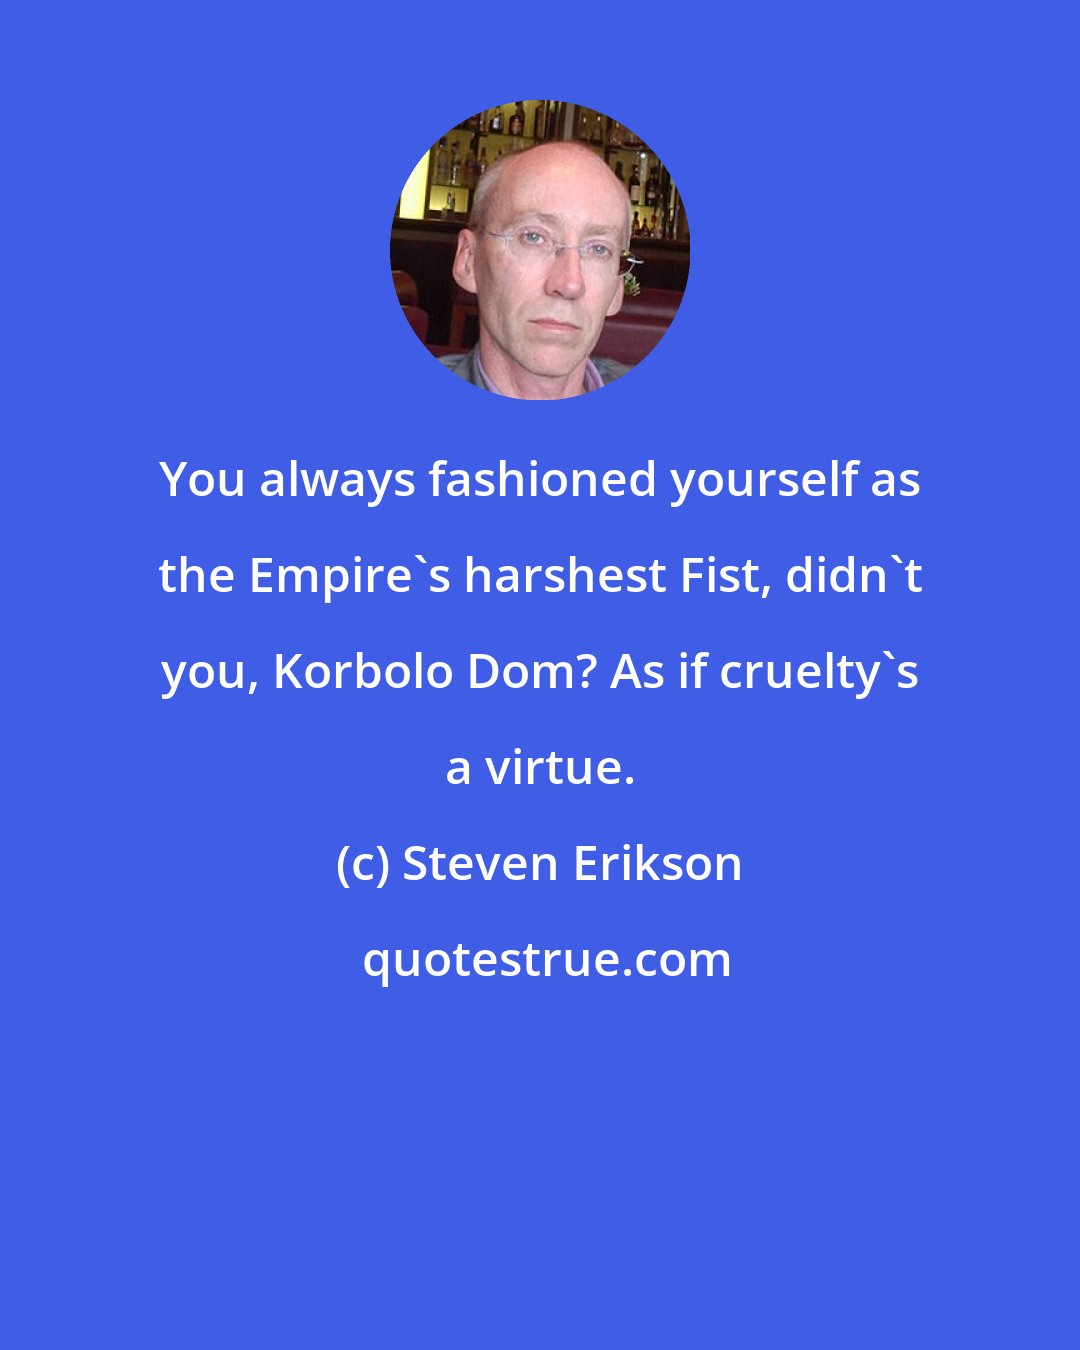 Steven Erikson: You always fashioned yourself as the Empire's harshest Fist, didn't you, Korbolo Dom? As if cruelty's a virtue.